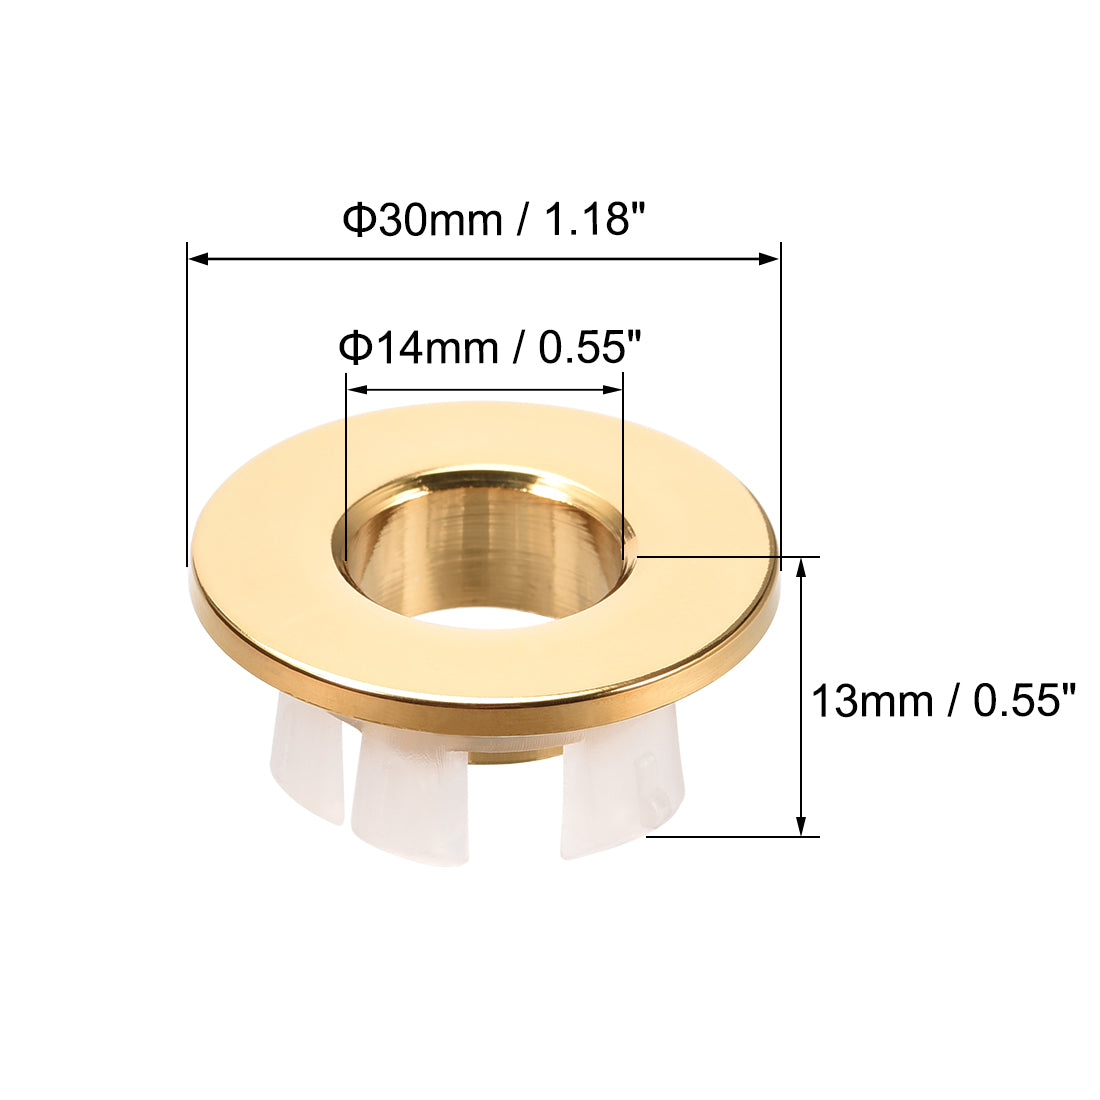 uxcell Uxcell Sink Overflow Covers Bathroom Kitchen Basin Trim Round Hole Caps Insert Spares Gold Tone 3 Pcs